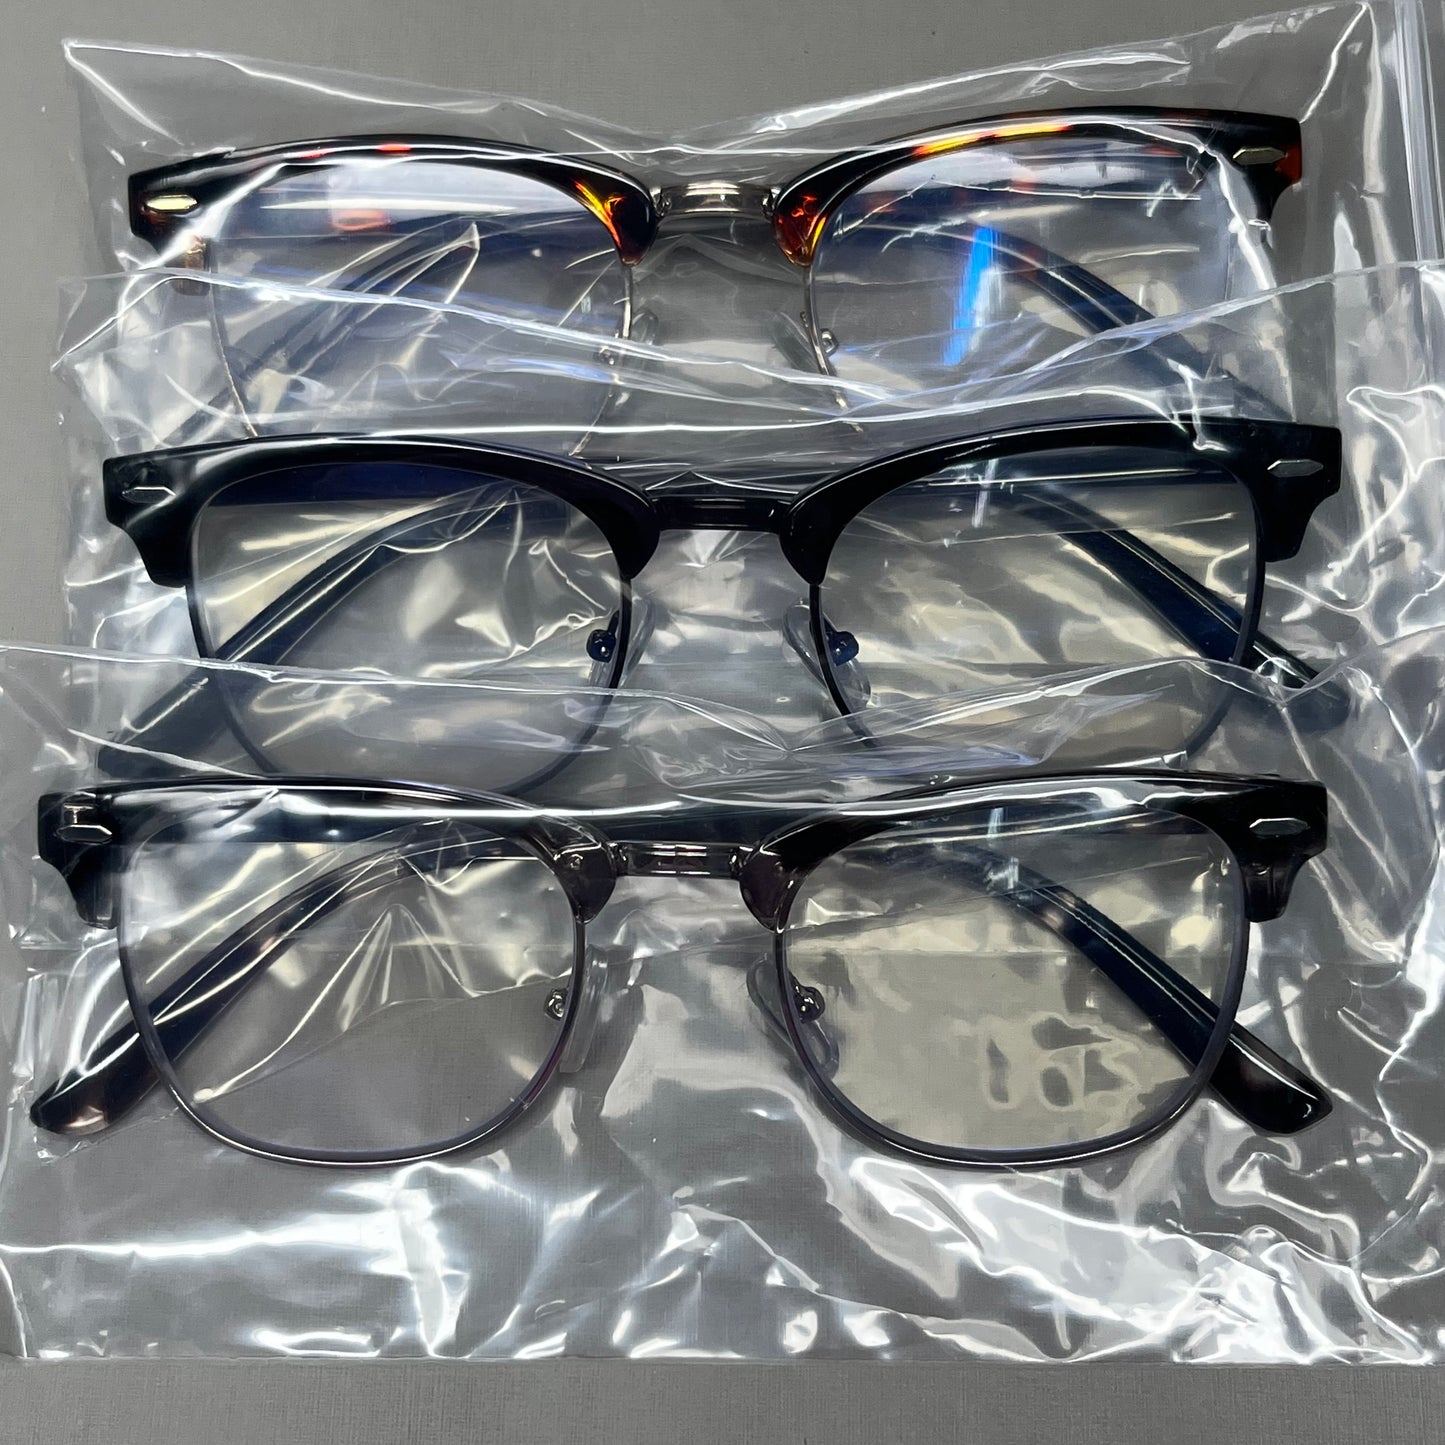 ZXYOO 3 Pack Classic Retro Reading Glasses 3.0x Magnification Strength (New)